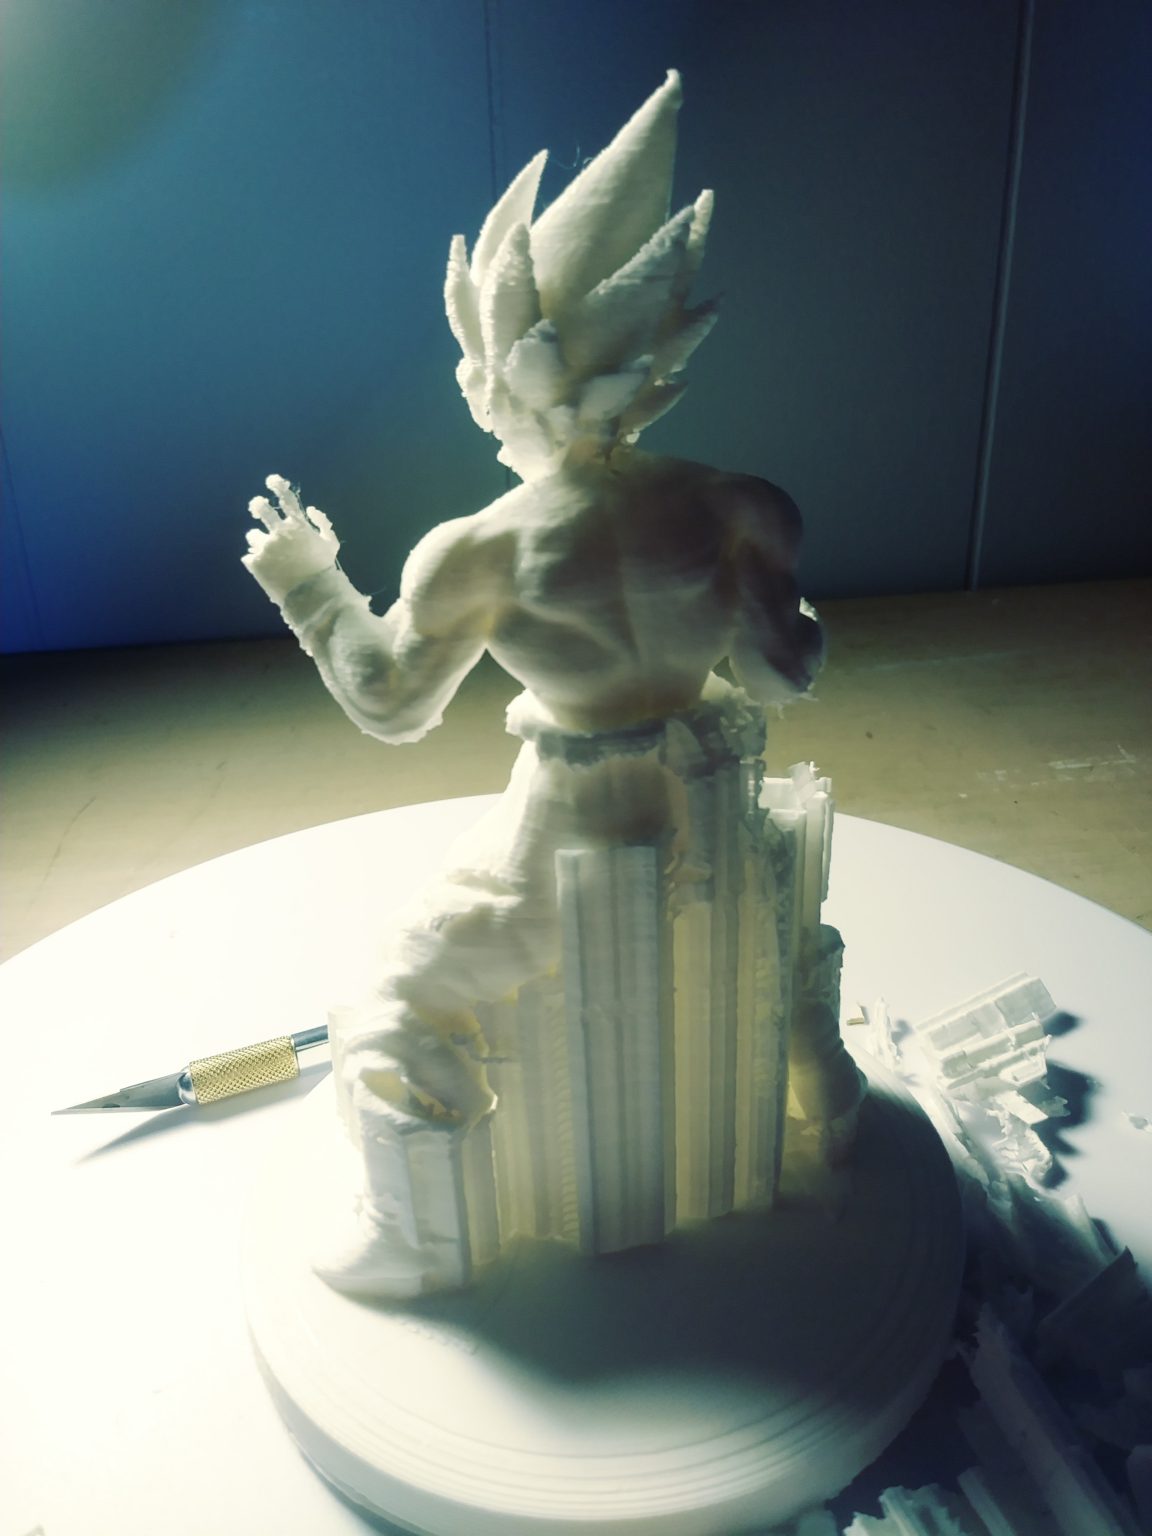 3D Print Your Own Anime Figures - Japan Powered